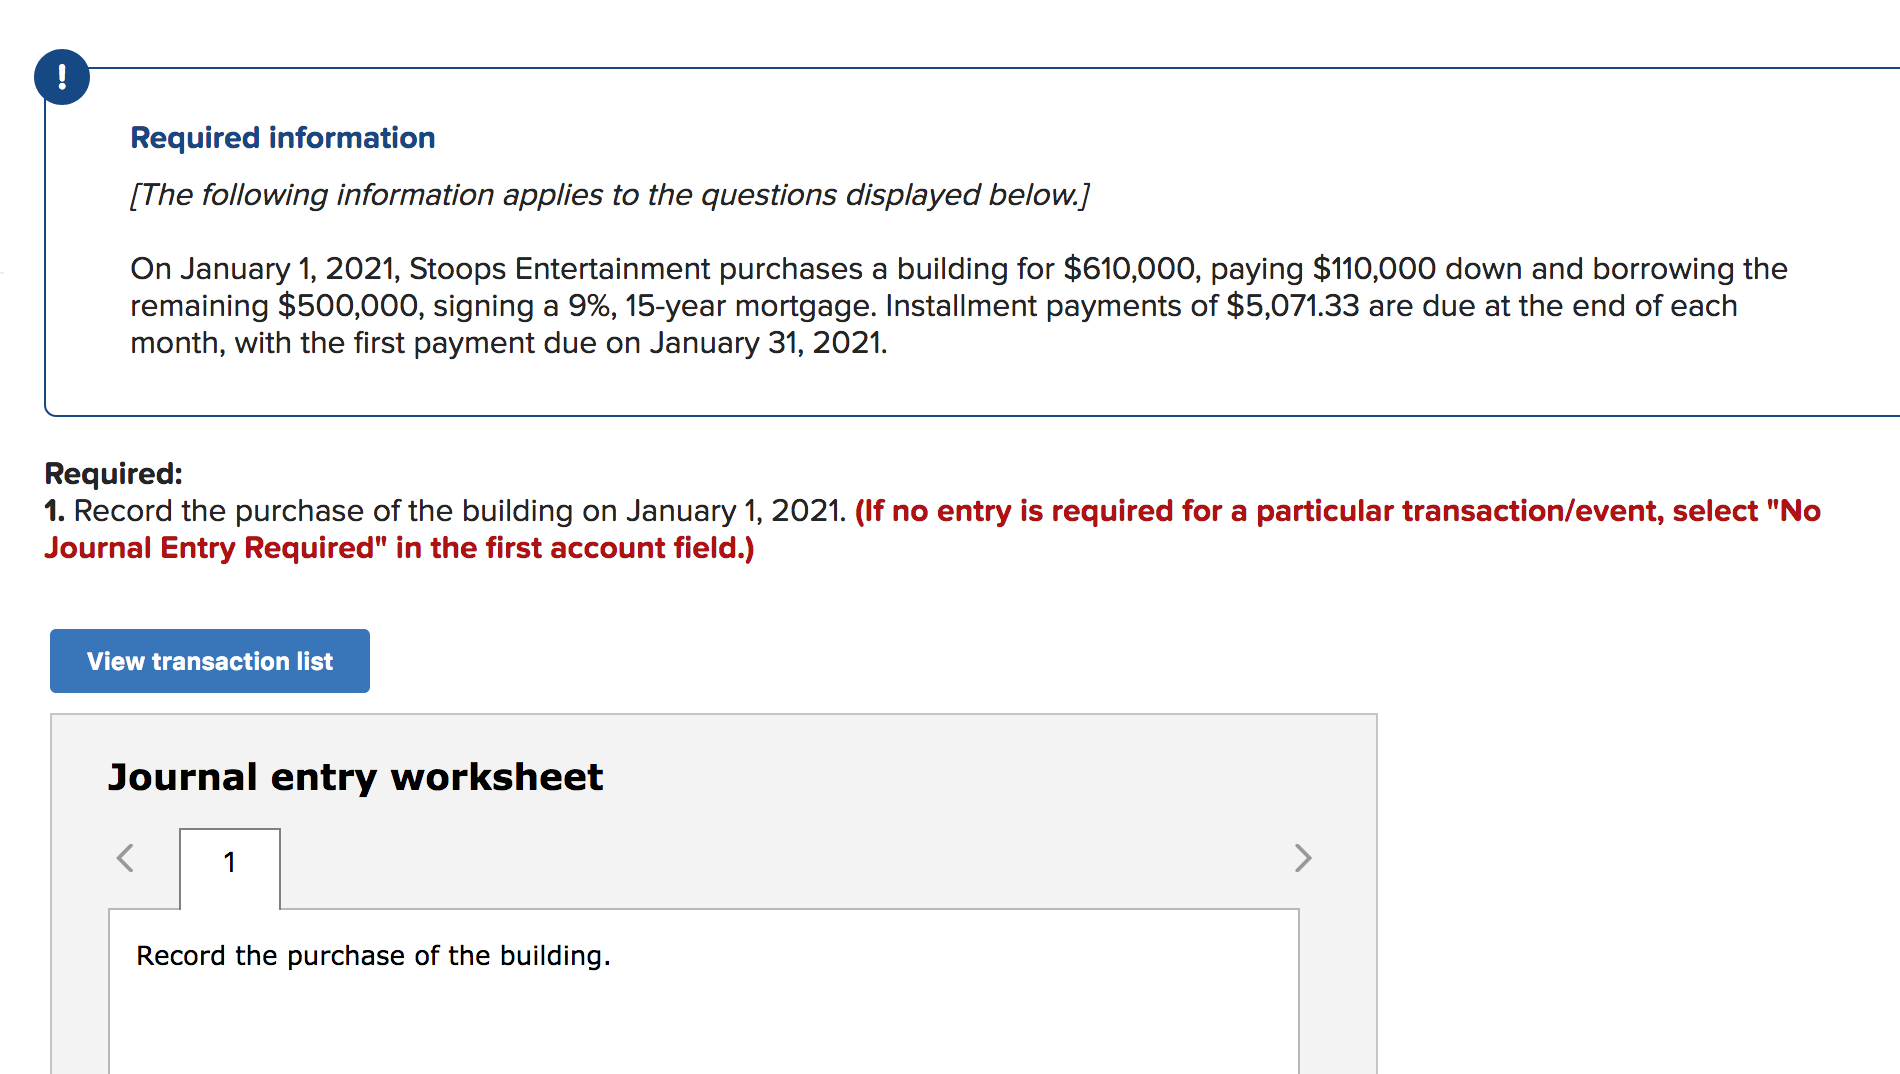 Required information
[The following information applies to the questions displayed below.]
On January 1, 2021, Stoops Entertainment purchases a building for $610,000, paying $110,000 down and borrowing the
remaining $500,000, signing a 9%, 15-year mortgage. Installment payments of $5,071.33 are due at the end of each
month, with the first payment due on January 31, 2021.
Required:
1. Record the purchase of the building on January 1, 2021. (If no entry is required for a particular transaction/event, select "No
Journal Entry Required" in the first account field.)
View transaction list
Journal entry worksheet
1
Record the purchase of the building.
